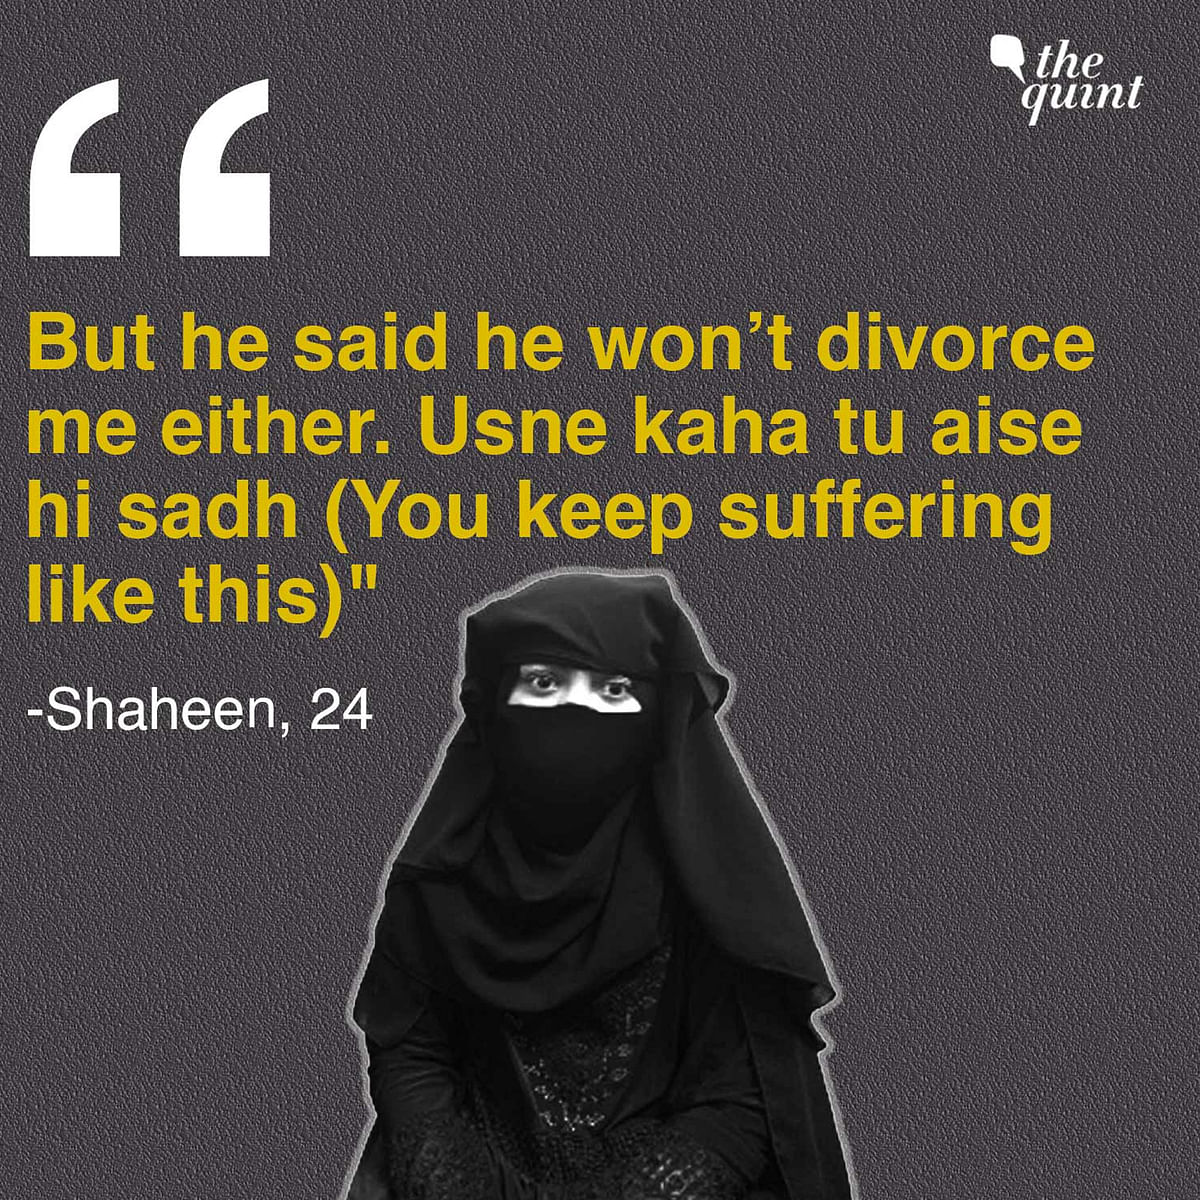 Three years since the Triple Talaq law, men aren't divorcing but deserting their wives, for fear of going to jail. 